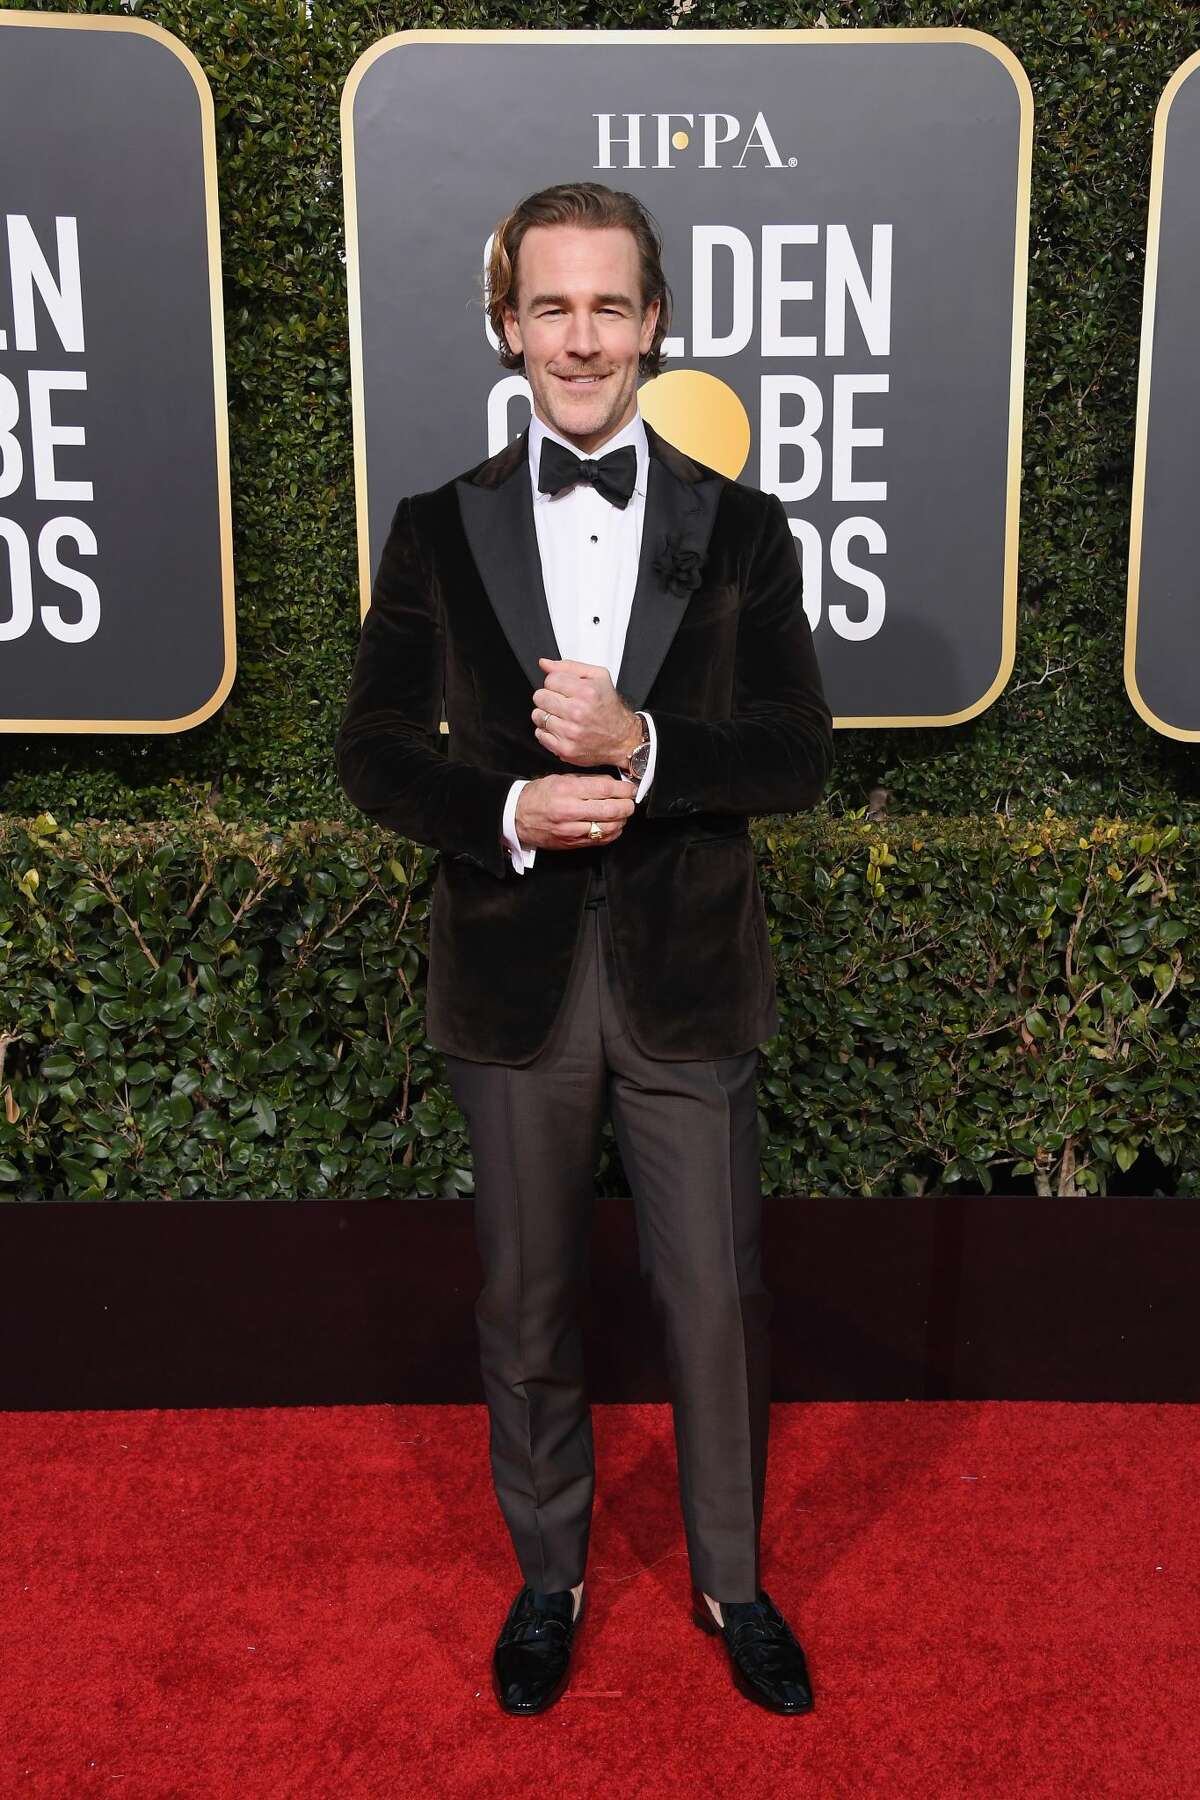 James Van Der Beek attends the 76th Annual Golden Globe Awards at The Beverly Hilton Hotel on January 6, 2019 in Beverly Hills, California. But what you may not know, is that James Van Der Beek, who plays the title character of Dawson, is a Connecticut native. Van Der Beek grew up in Cheshire and graduated from the Cheshire Academy in 1995 (math buffs will realize this means he was actually 20 years old when playing 15-year-old Dawson). In fact, Van Der Beek spoke at this year's graduation, giving a virtual message to seniors. "I'm sorry you guys aren't getting a graduation ceremony. I'm sorry you didn't get a prom, I'm sorry you didn't get to do your senior class play," he said in a video. RELATED: Famous people from Connecticut